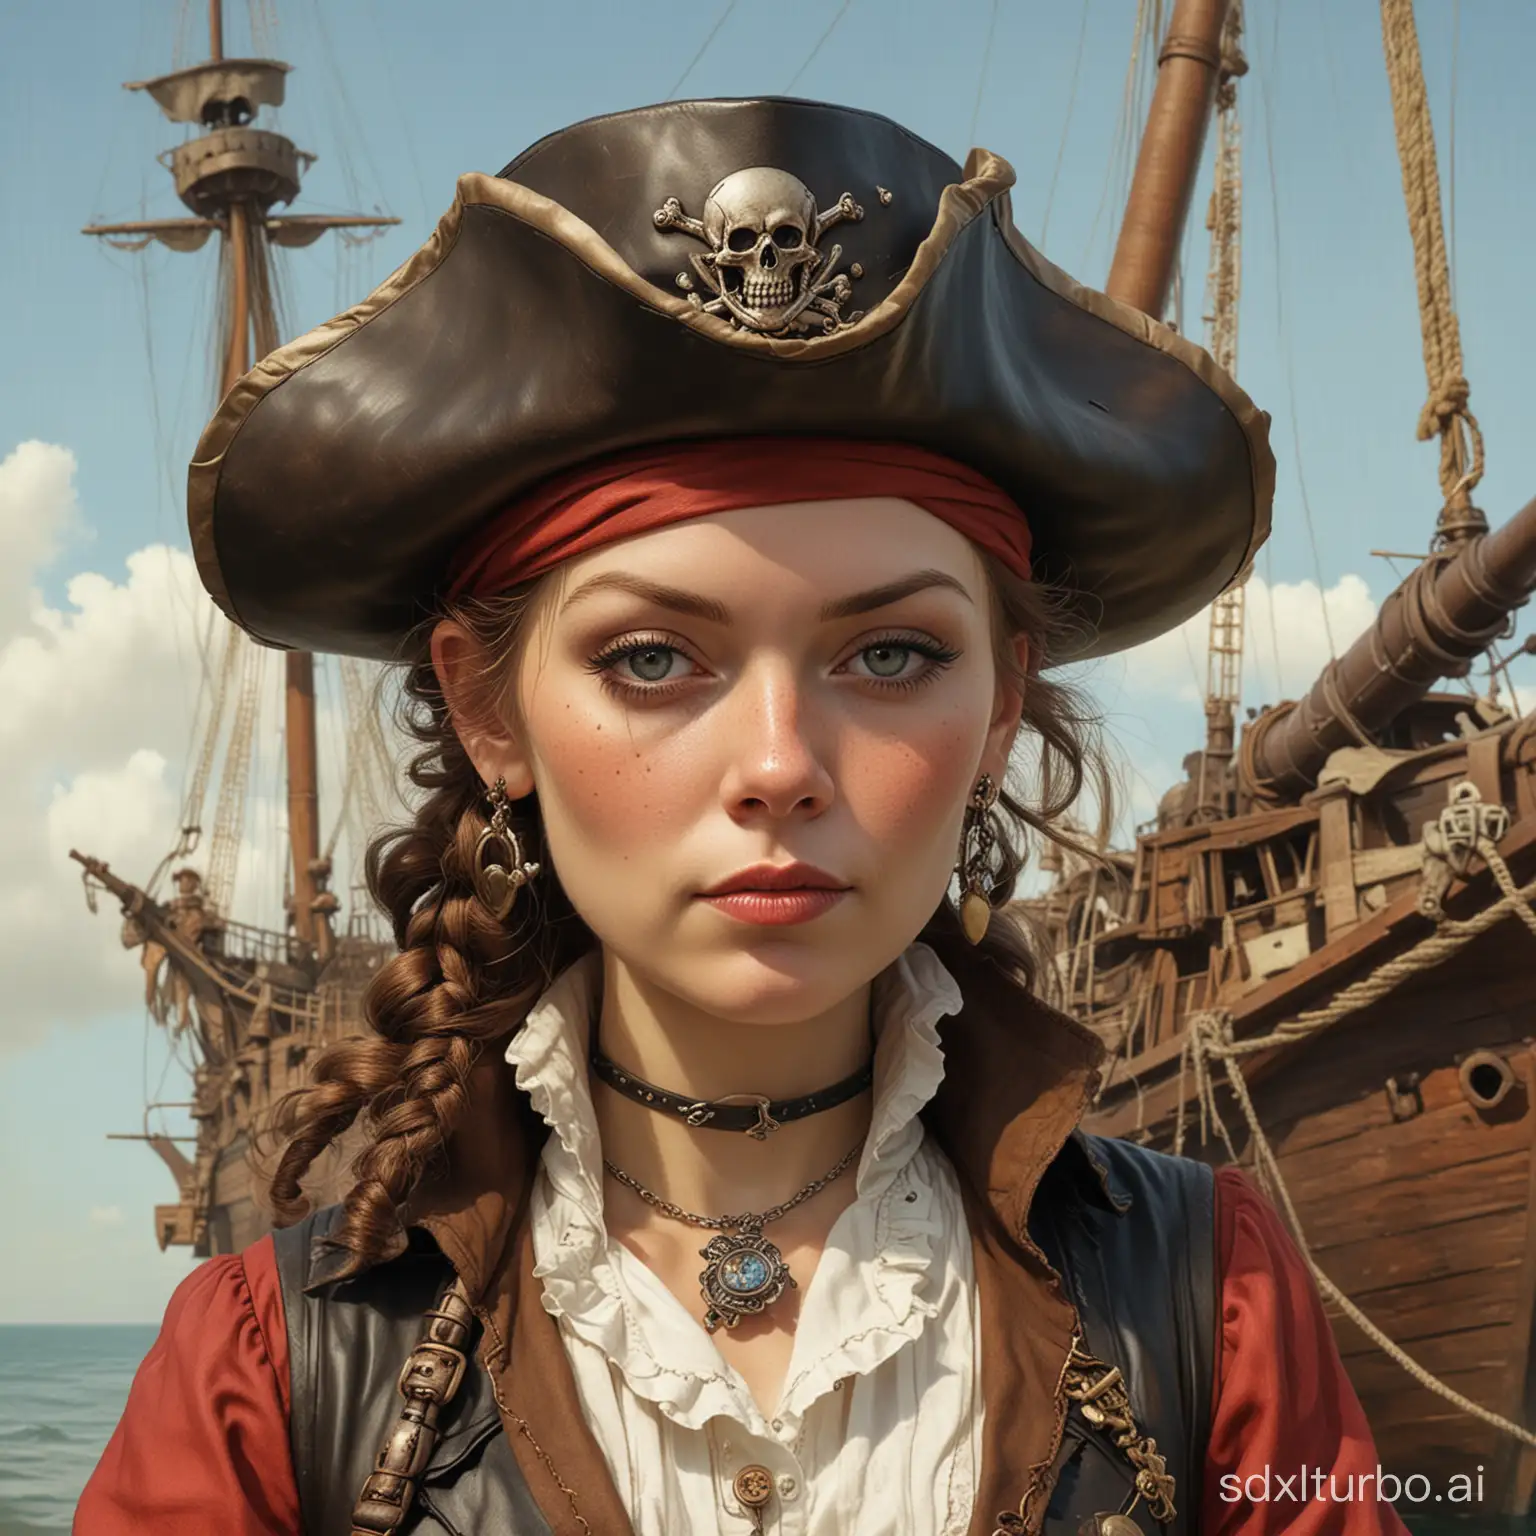 Stunningly attractive, pirate lady. In the style of Greg Simkins, Norman Rockwell and Isaac Cordal